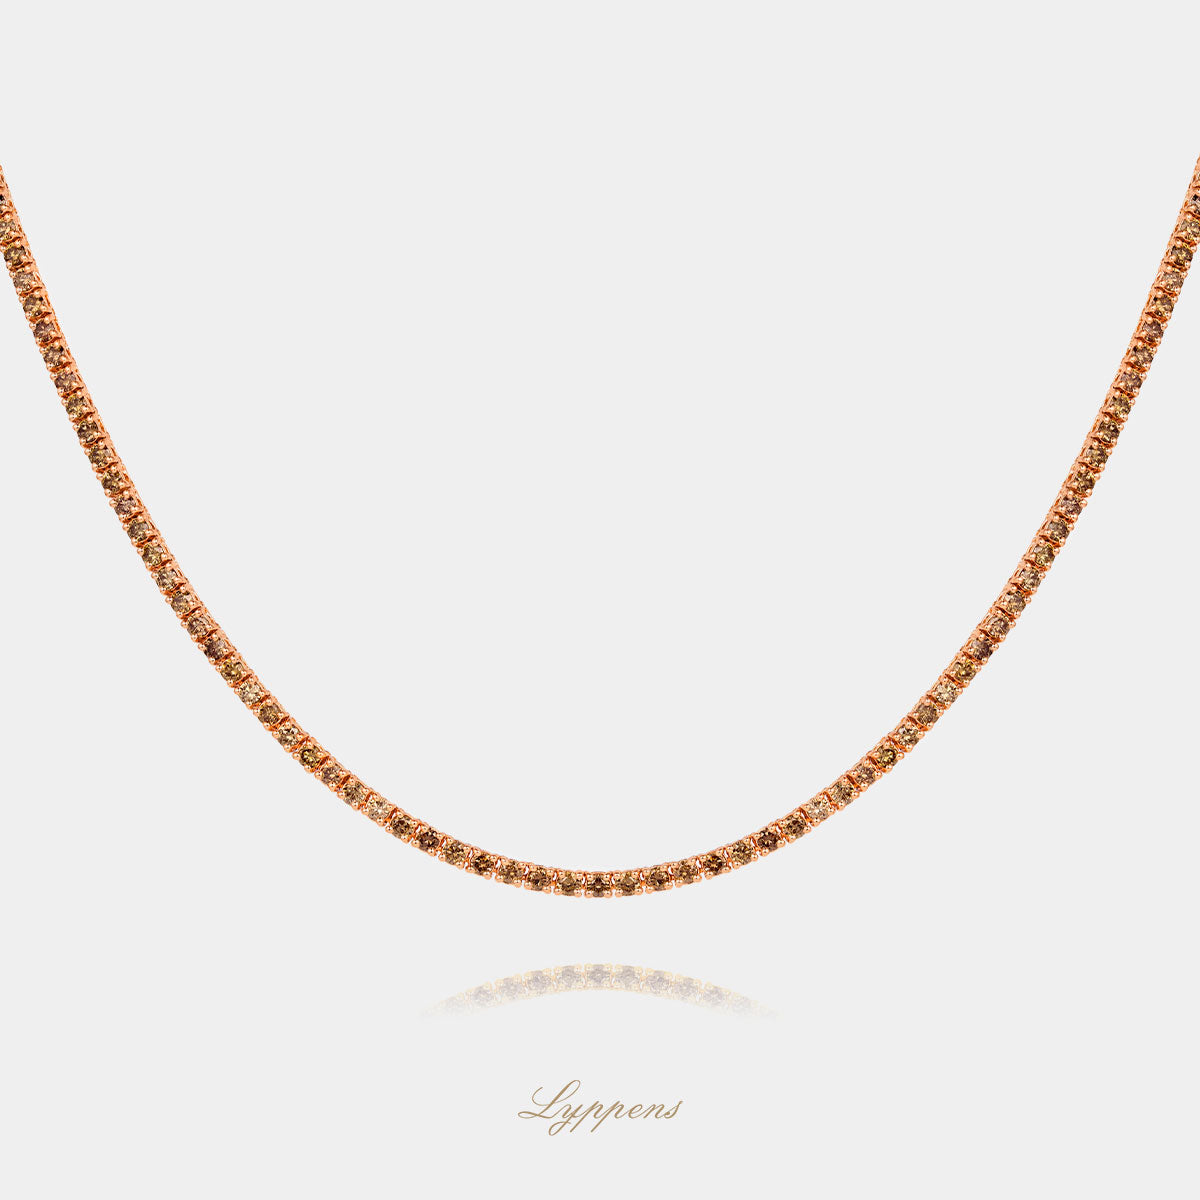 Rose gold tennis necklace with brown diamond 5.00ct